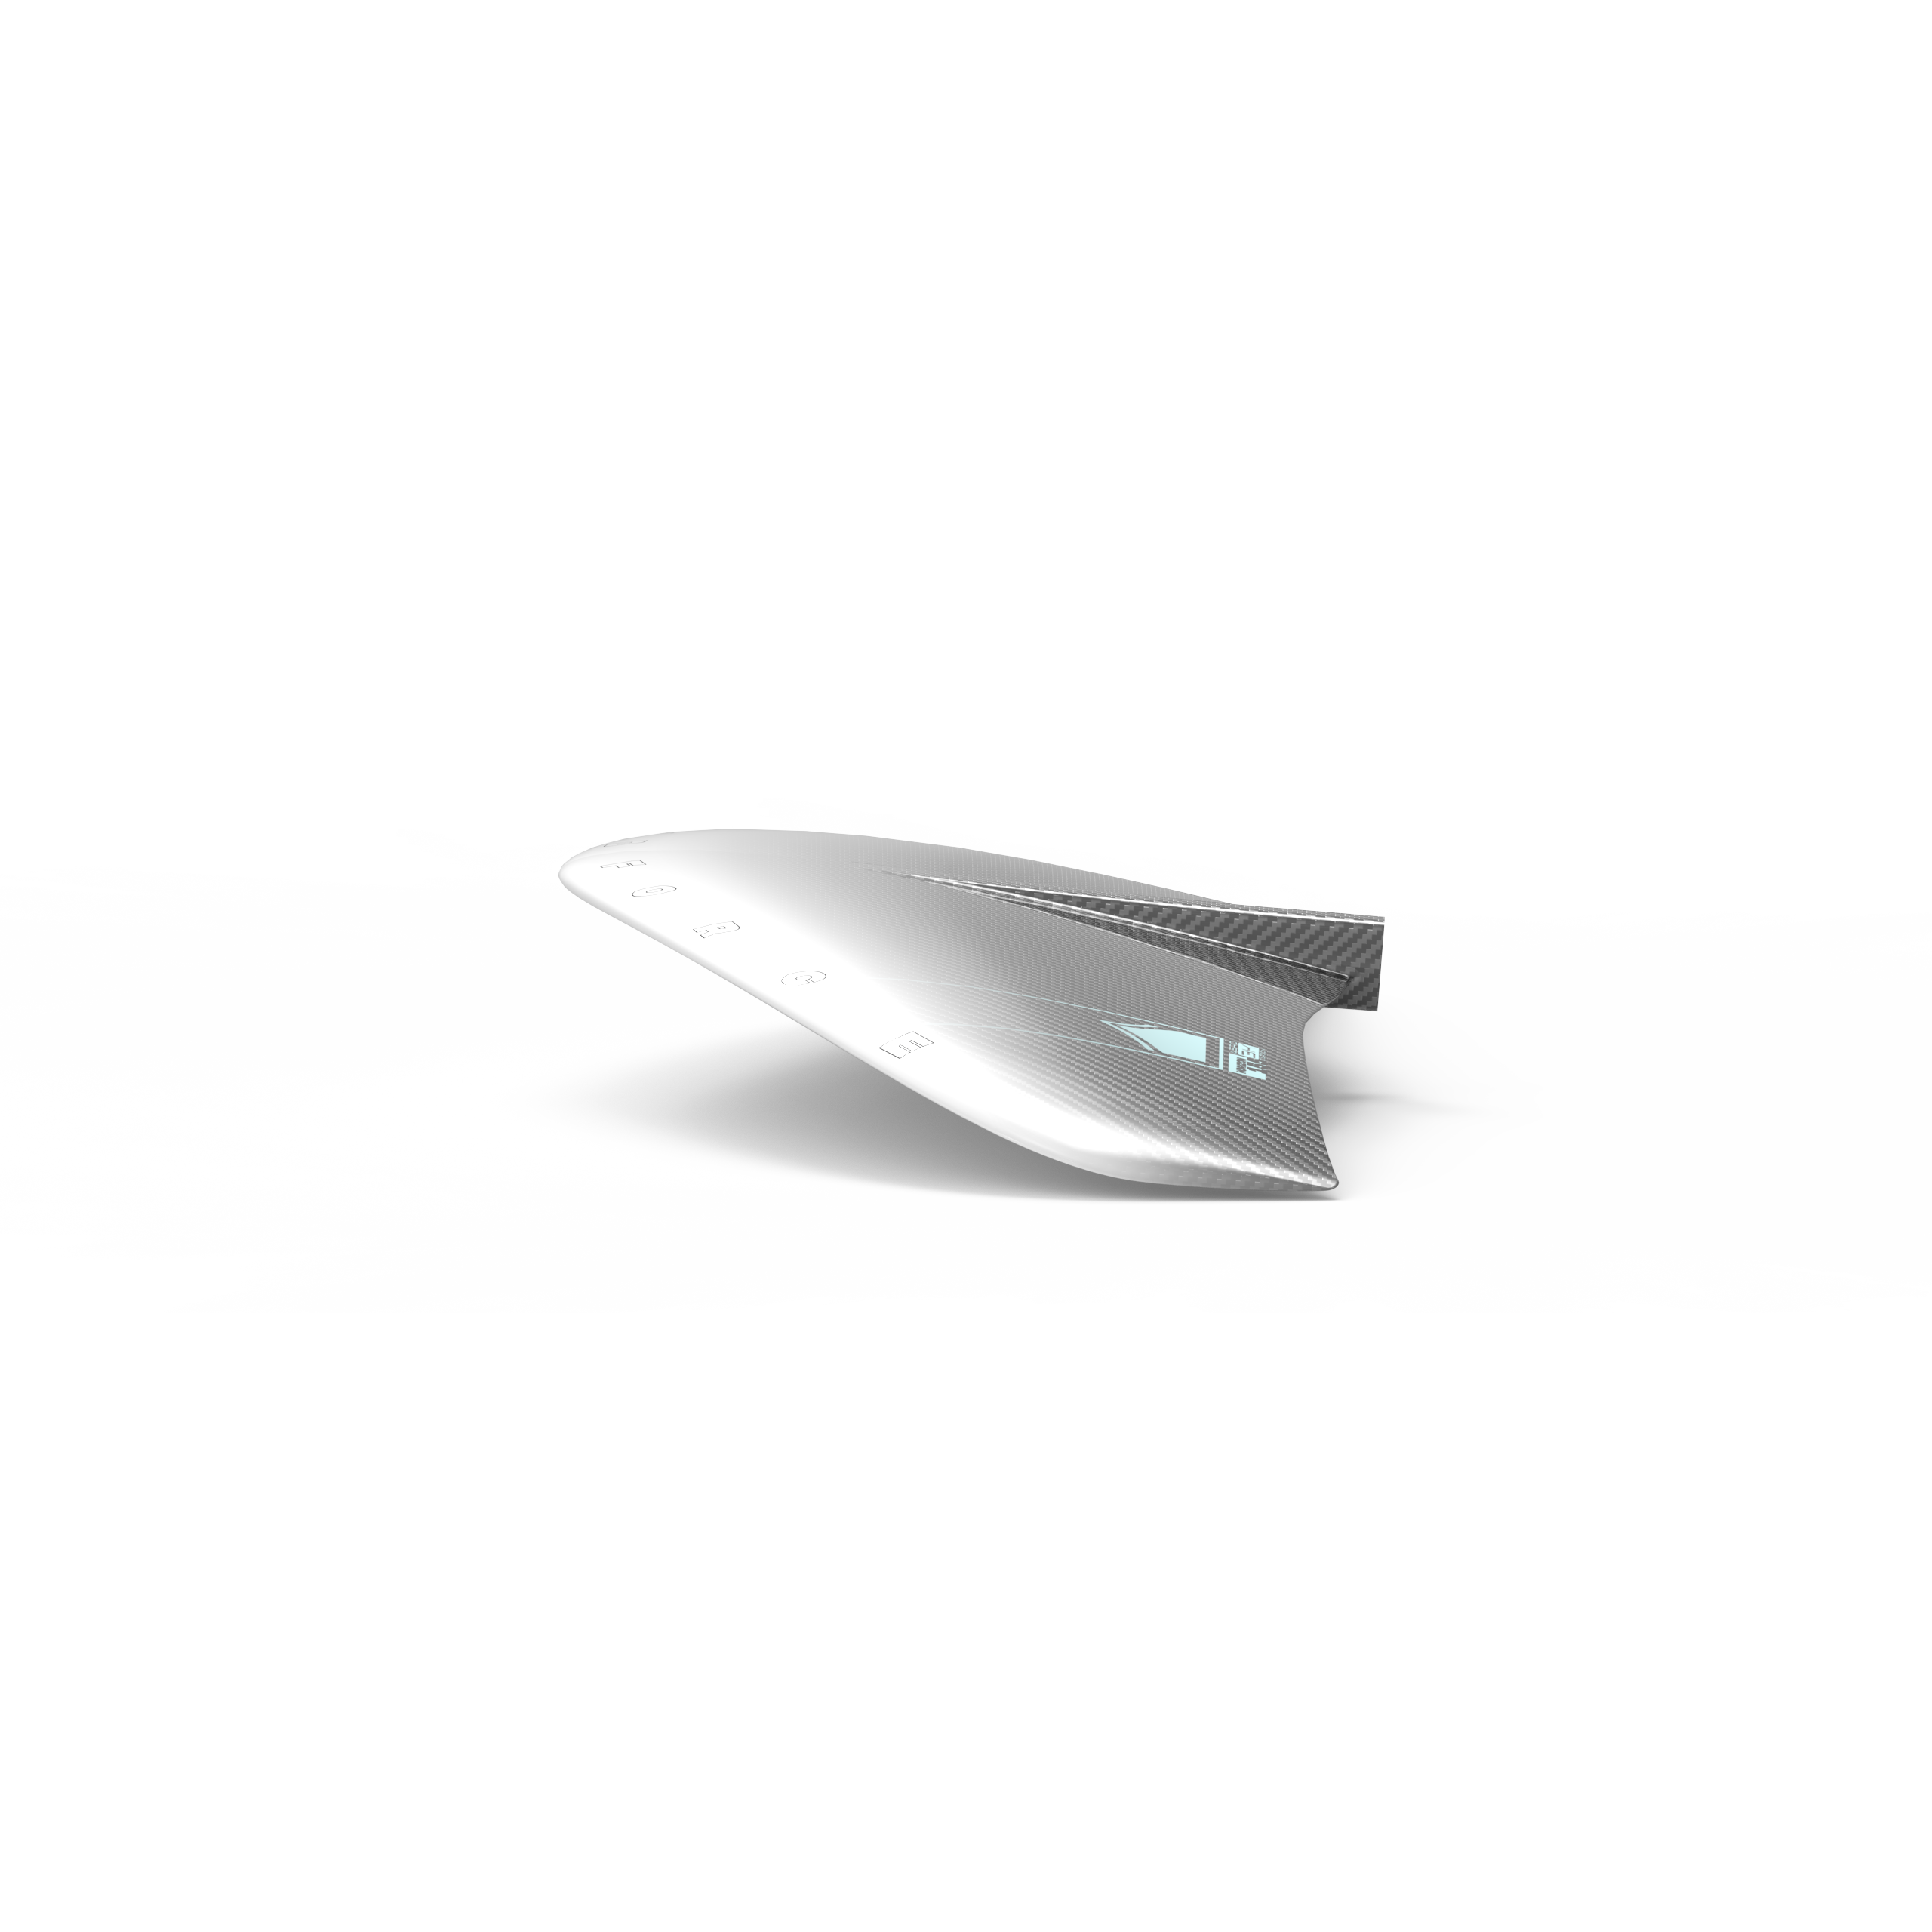 A lightweight futuristic Liquid Force 2024 Horizon Surf 155 Front Wing gliding at low-speed lift on a white surface.